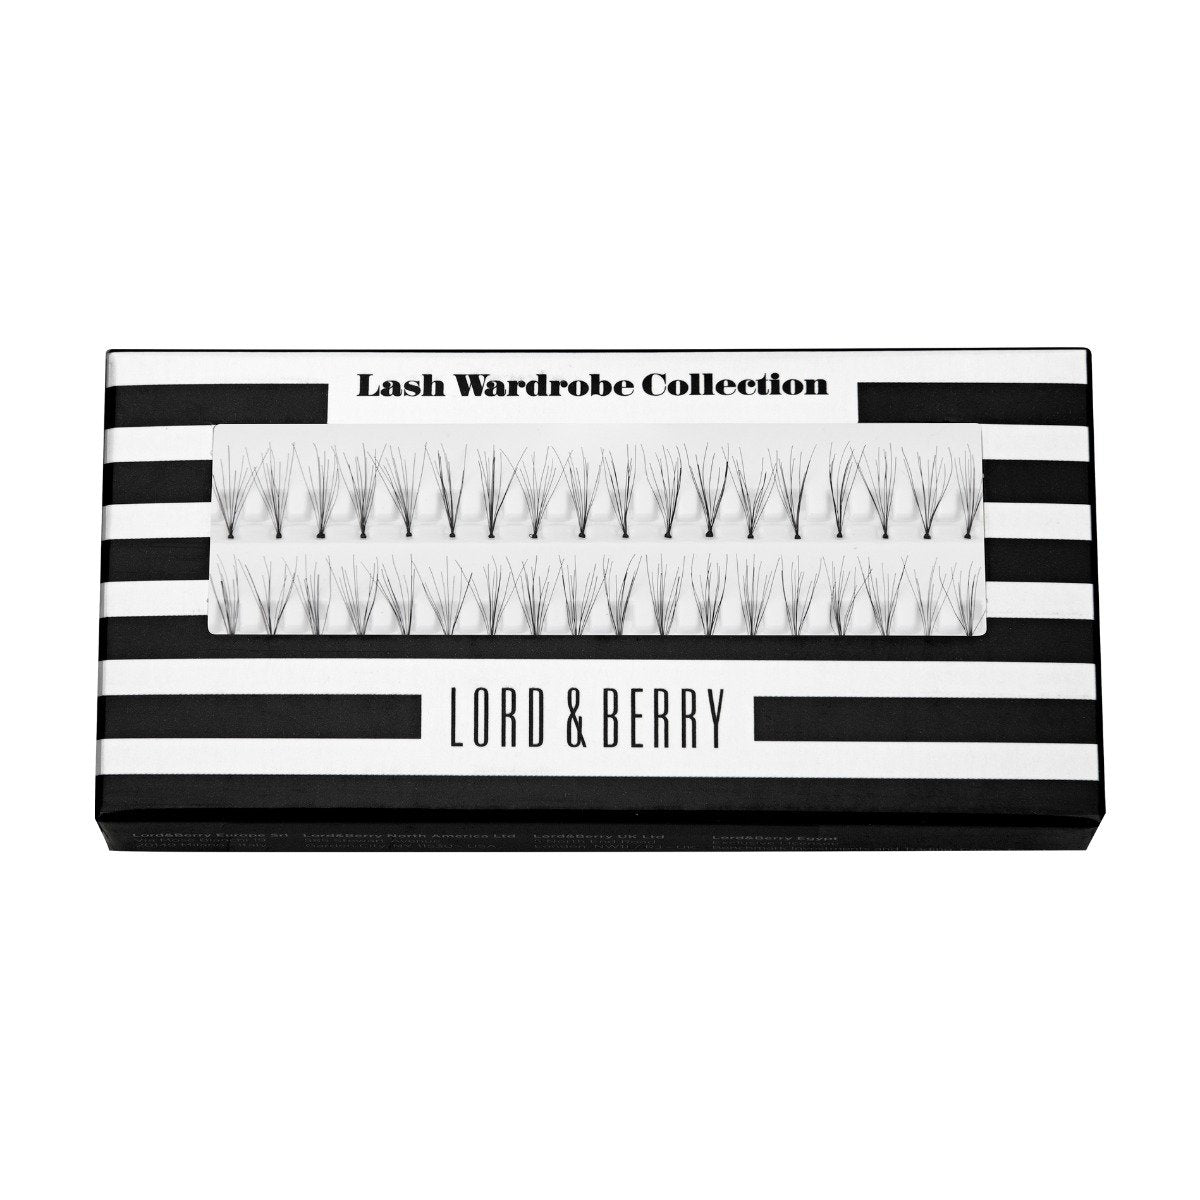 Lord & Berry Eyelashes Wardrobe Collection - EL18 - Bloom Pharmacy